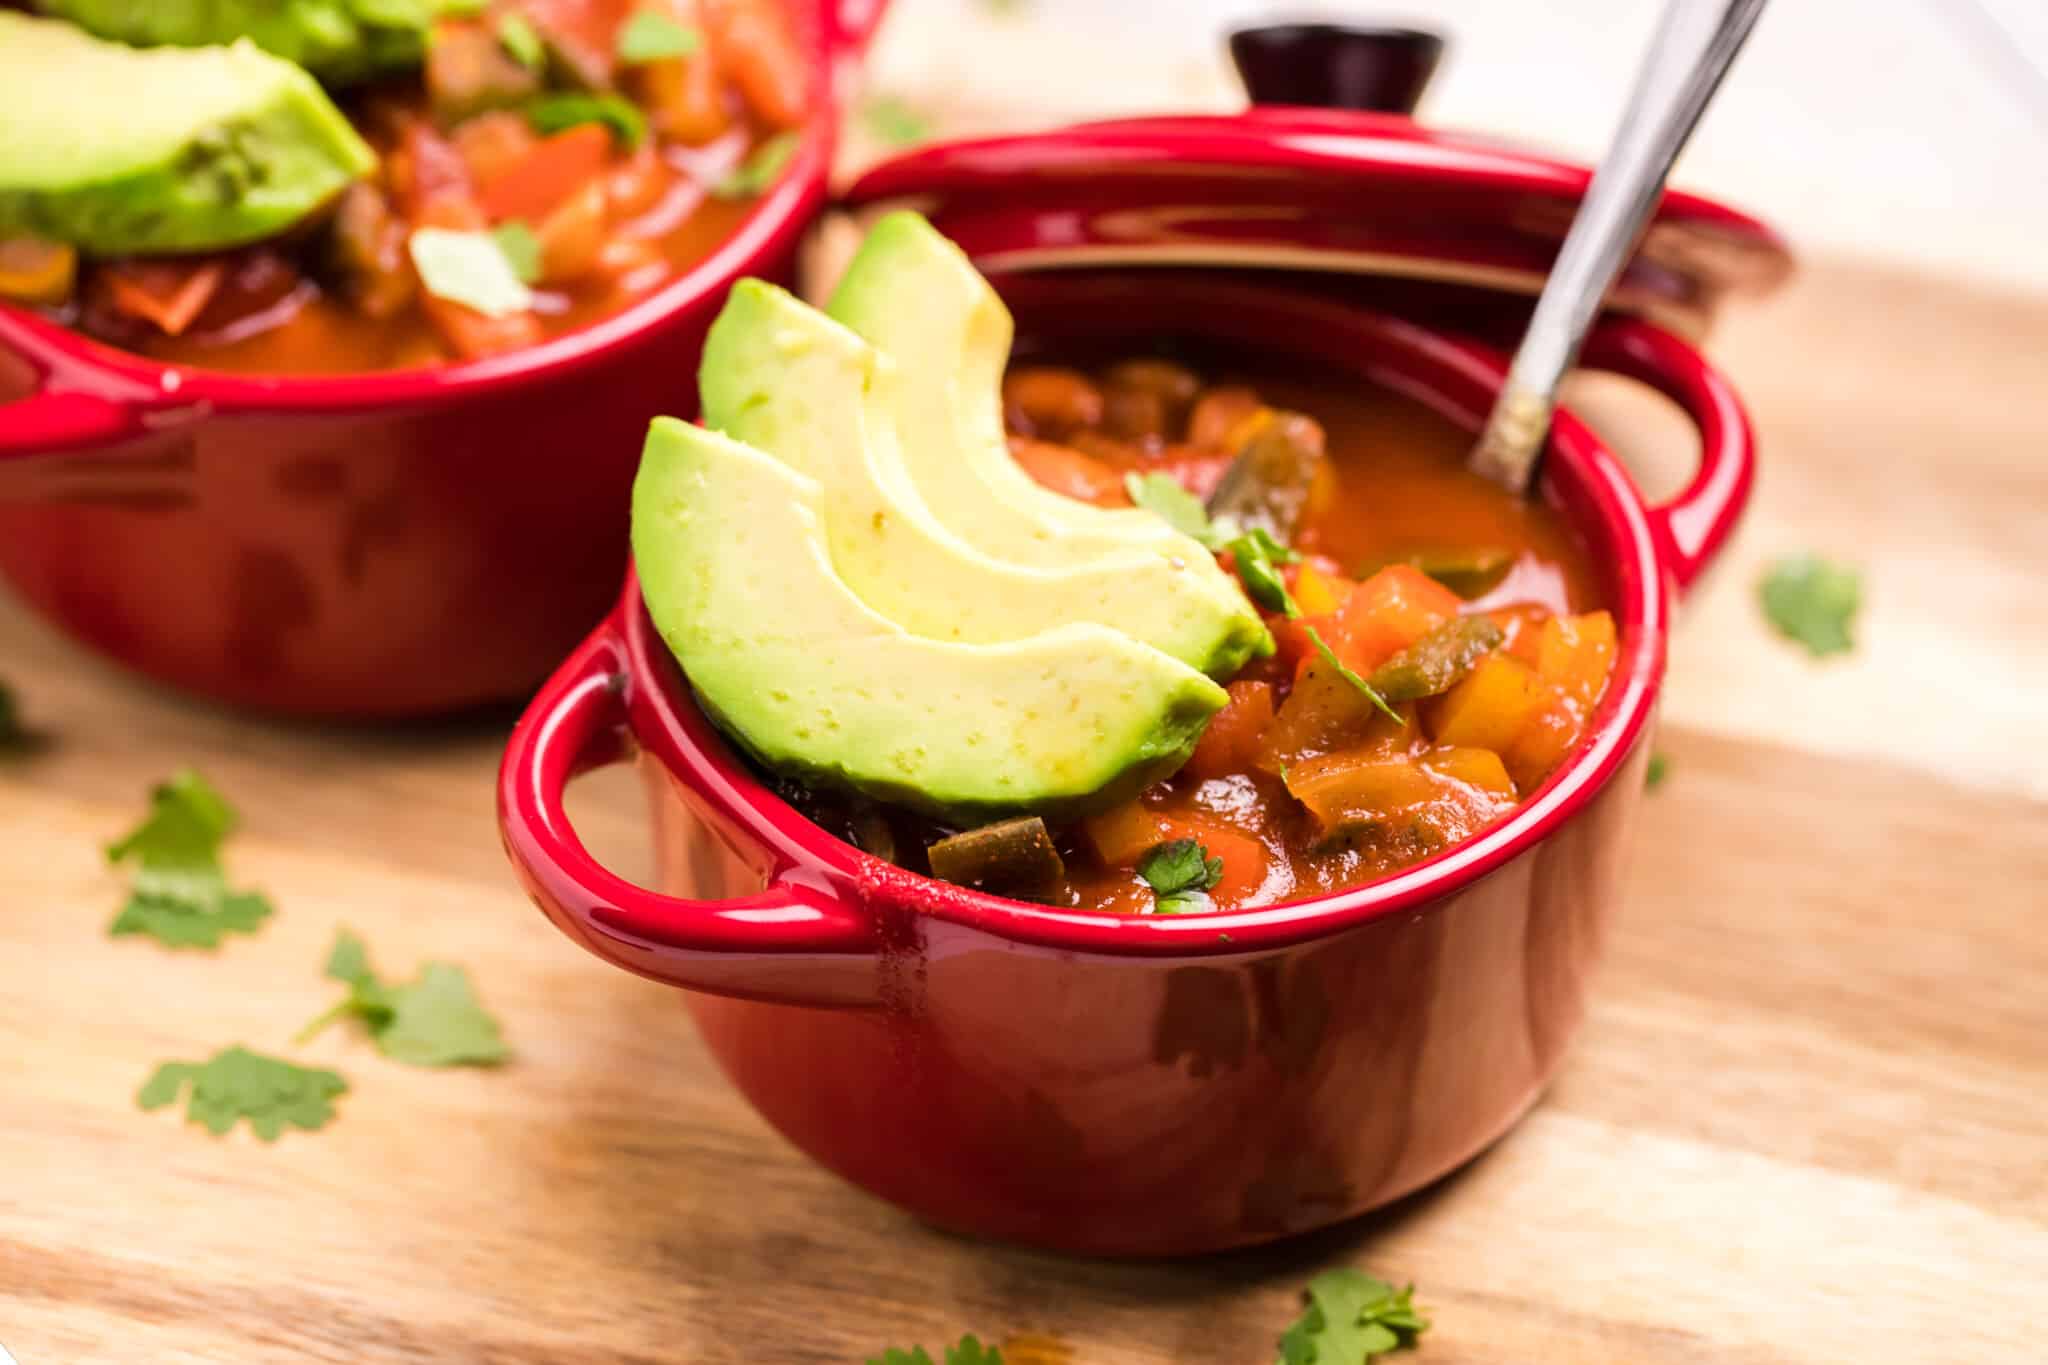 vegetarian chili in red bowl